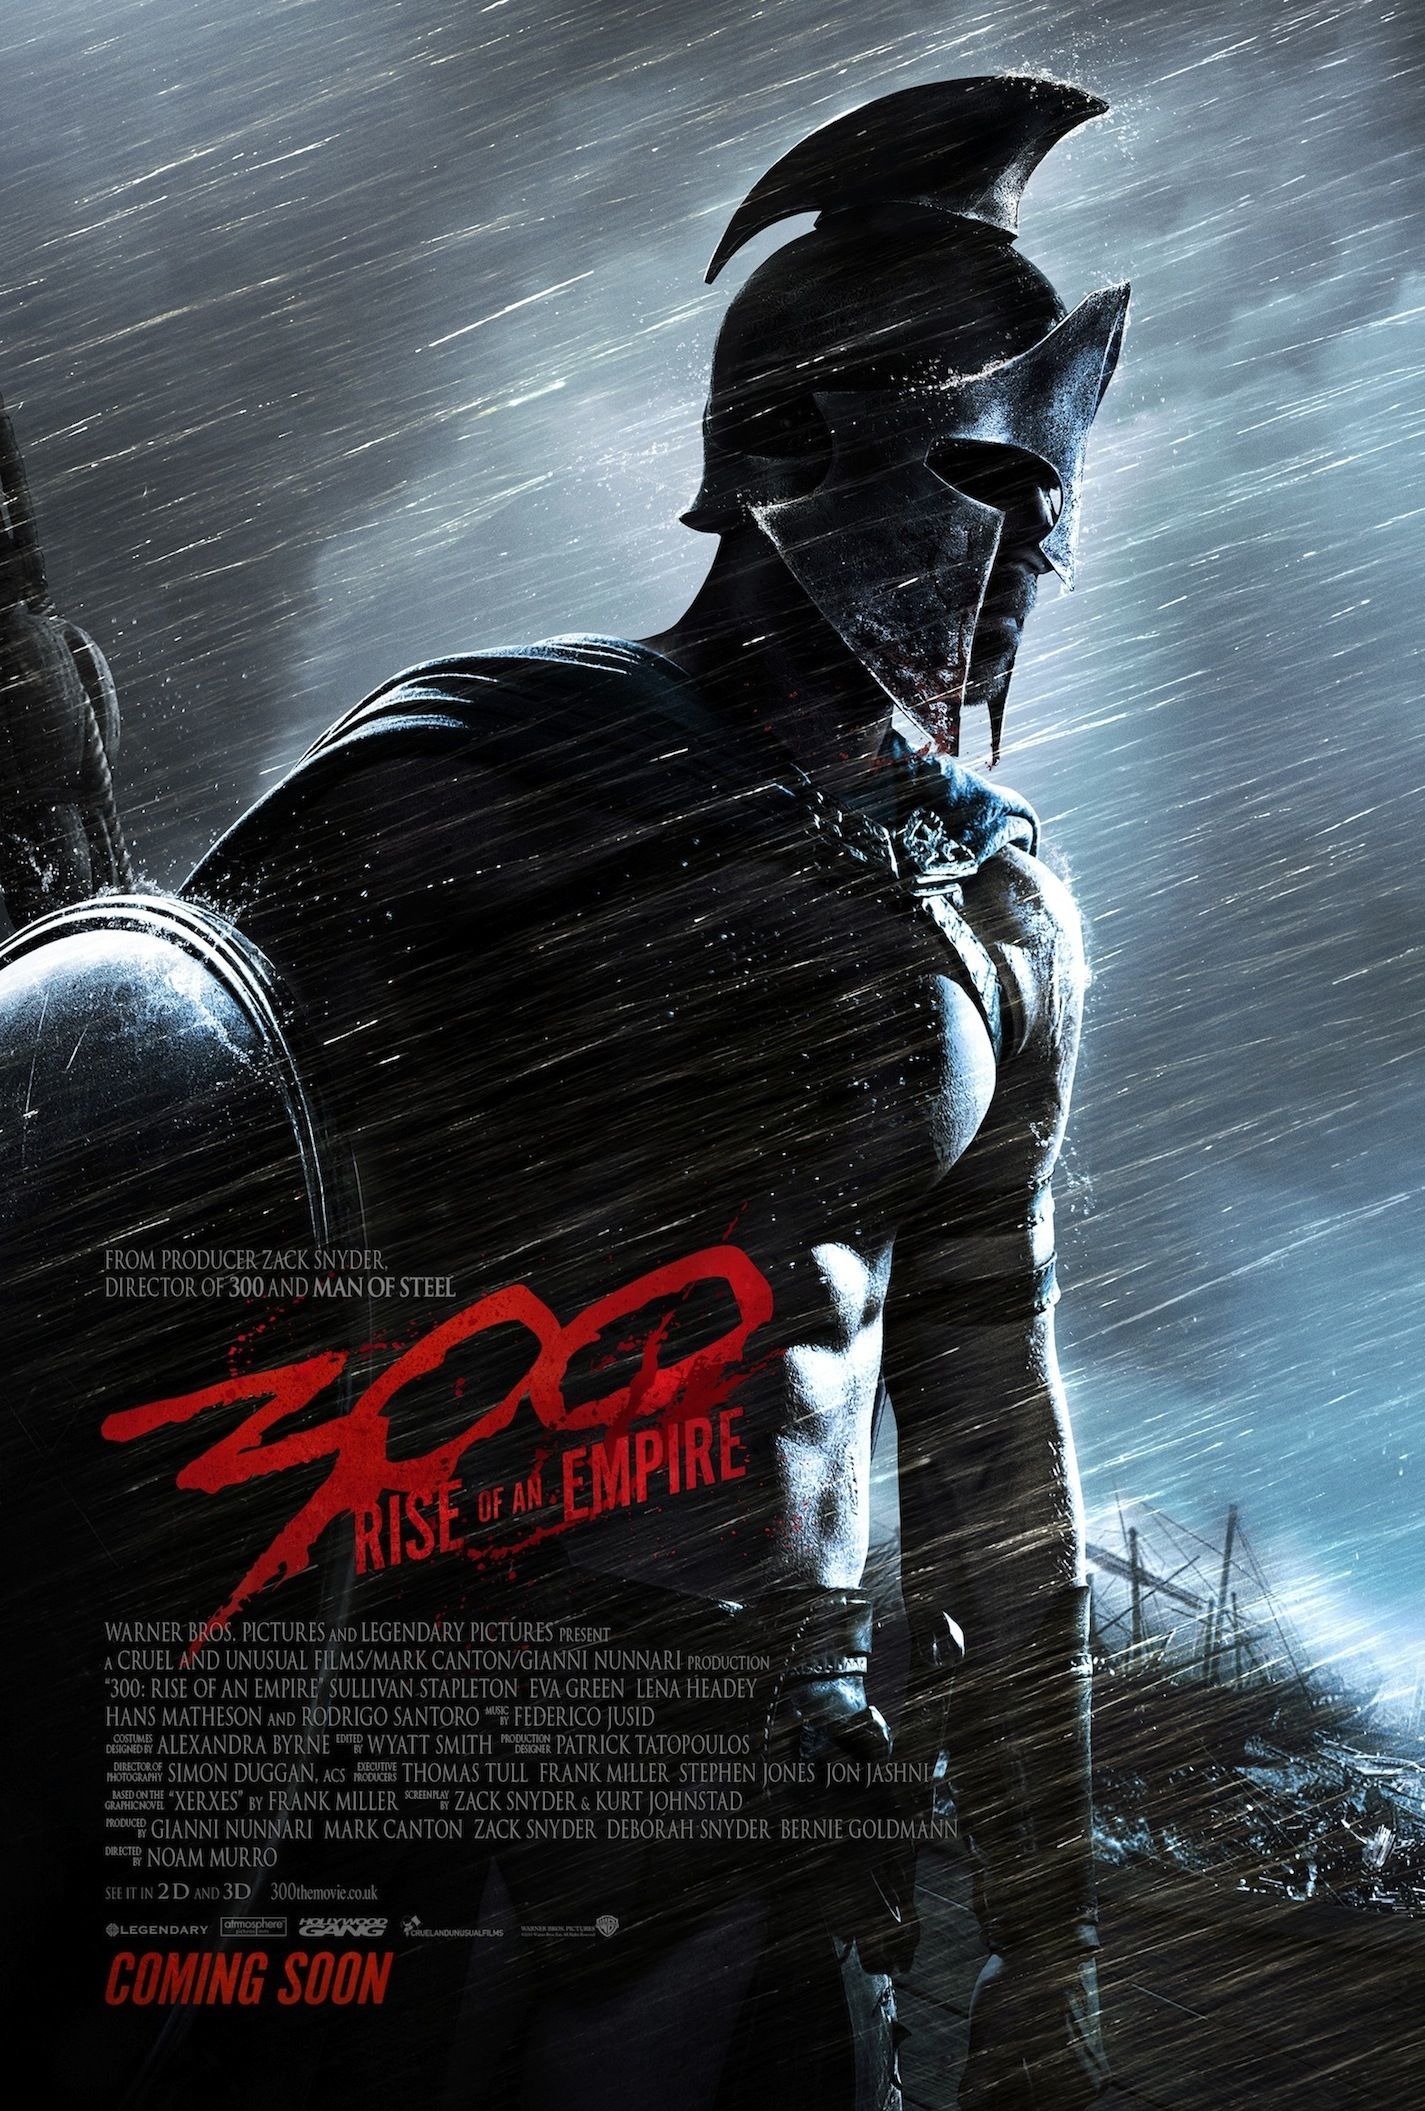 300 rise of an empire hindi dubbed full movie